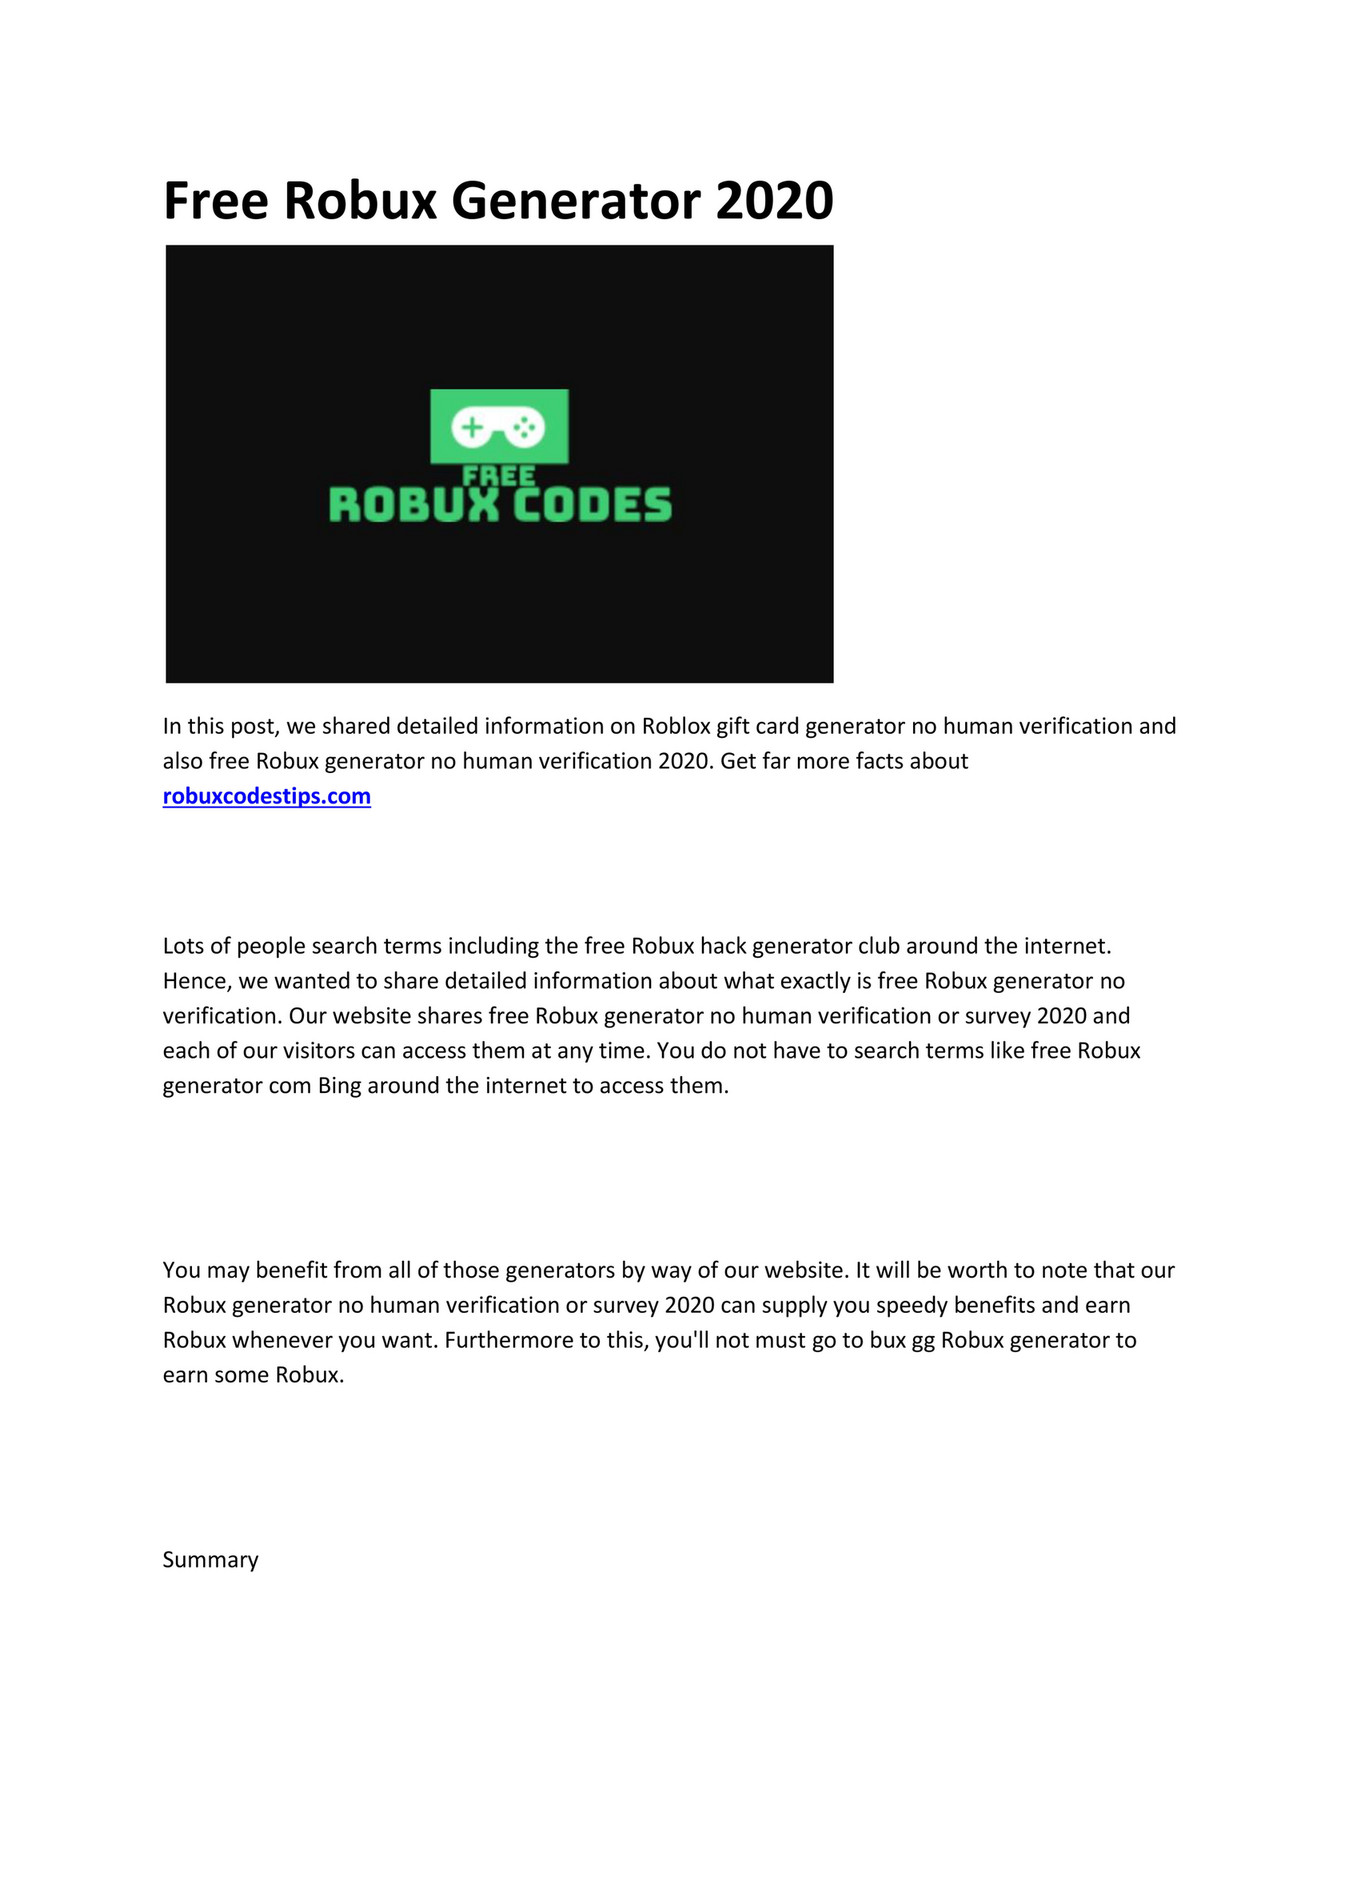 My Publications Free Robux Codes Generator 2020 5k Free Rubox Daily Page 1 Created With Publitas Com - earn free robux websites